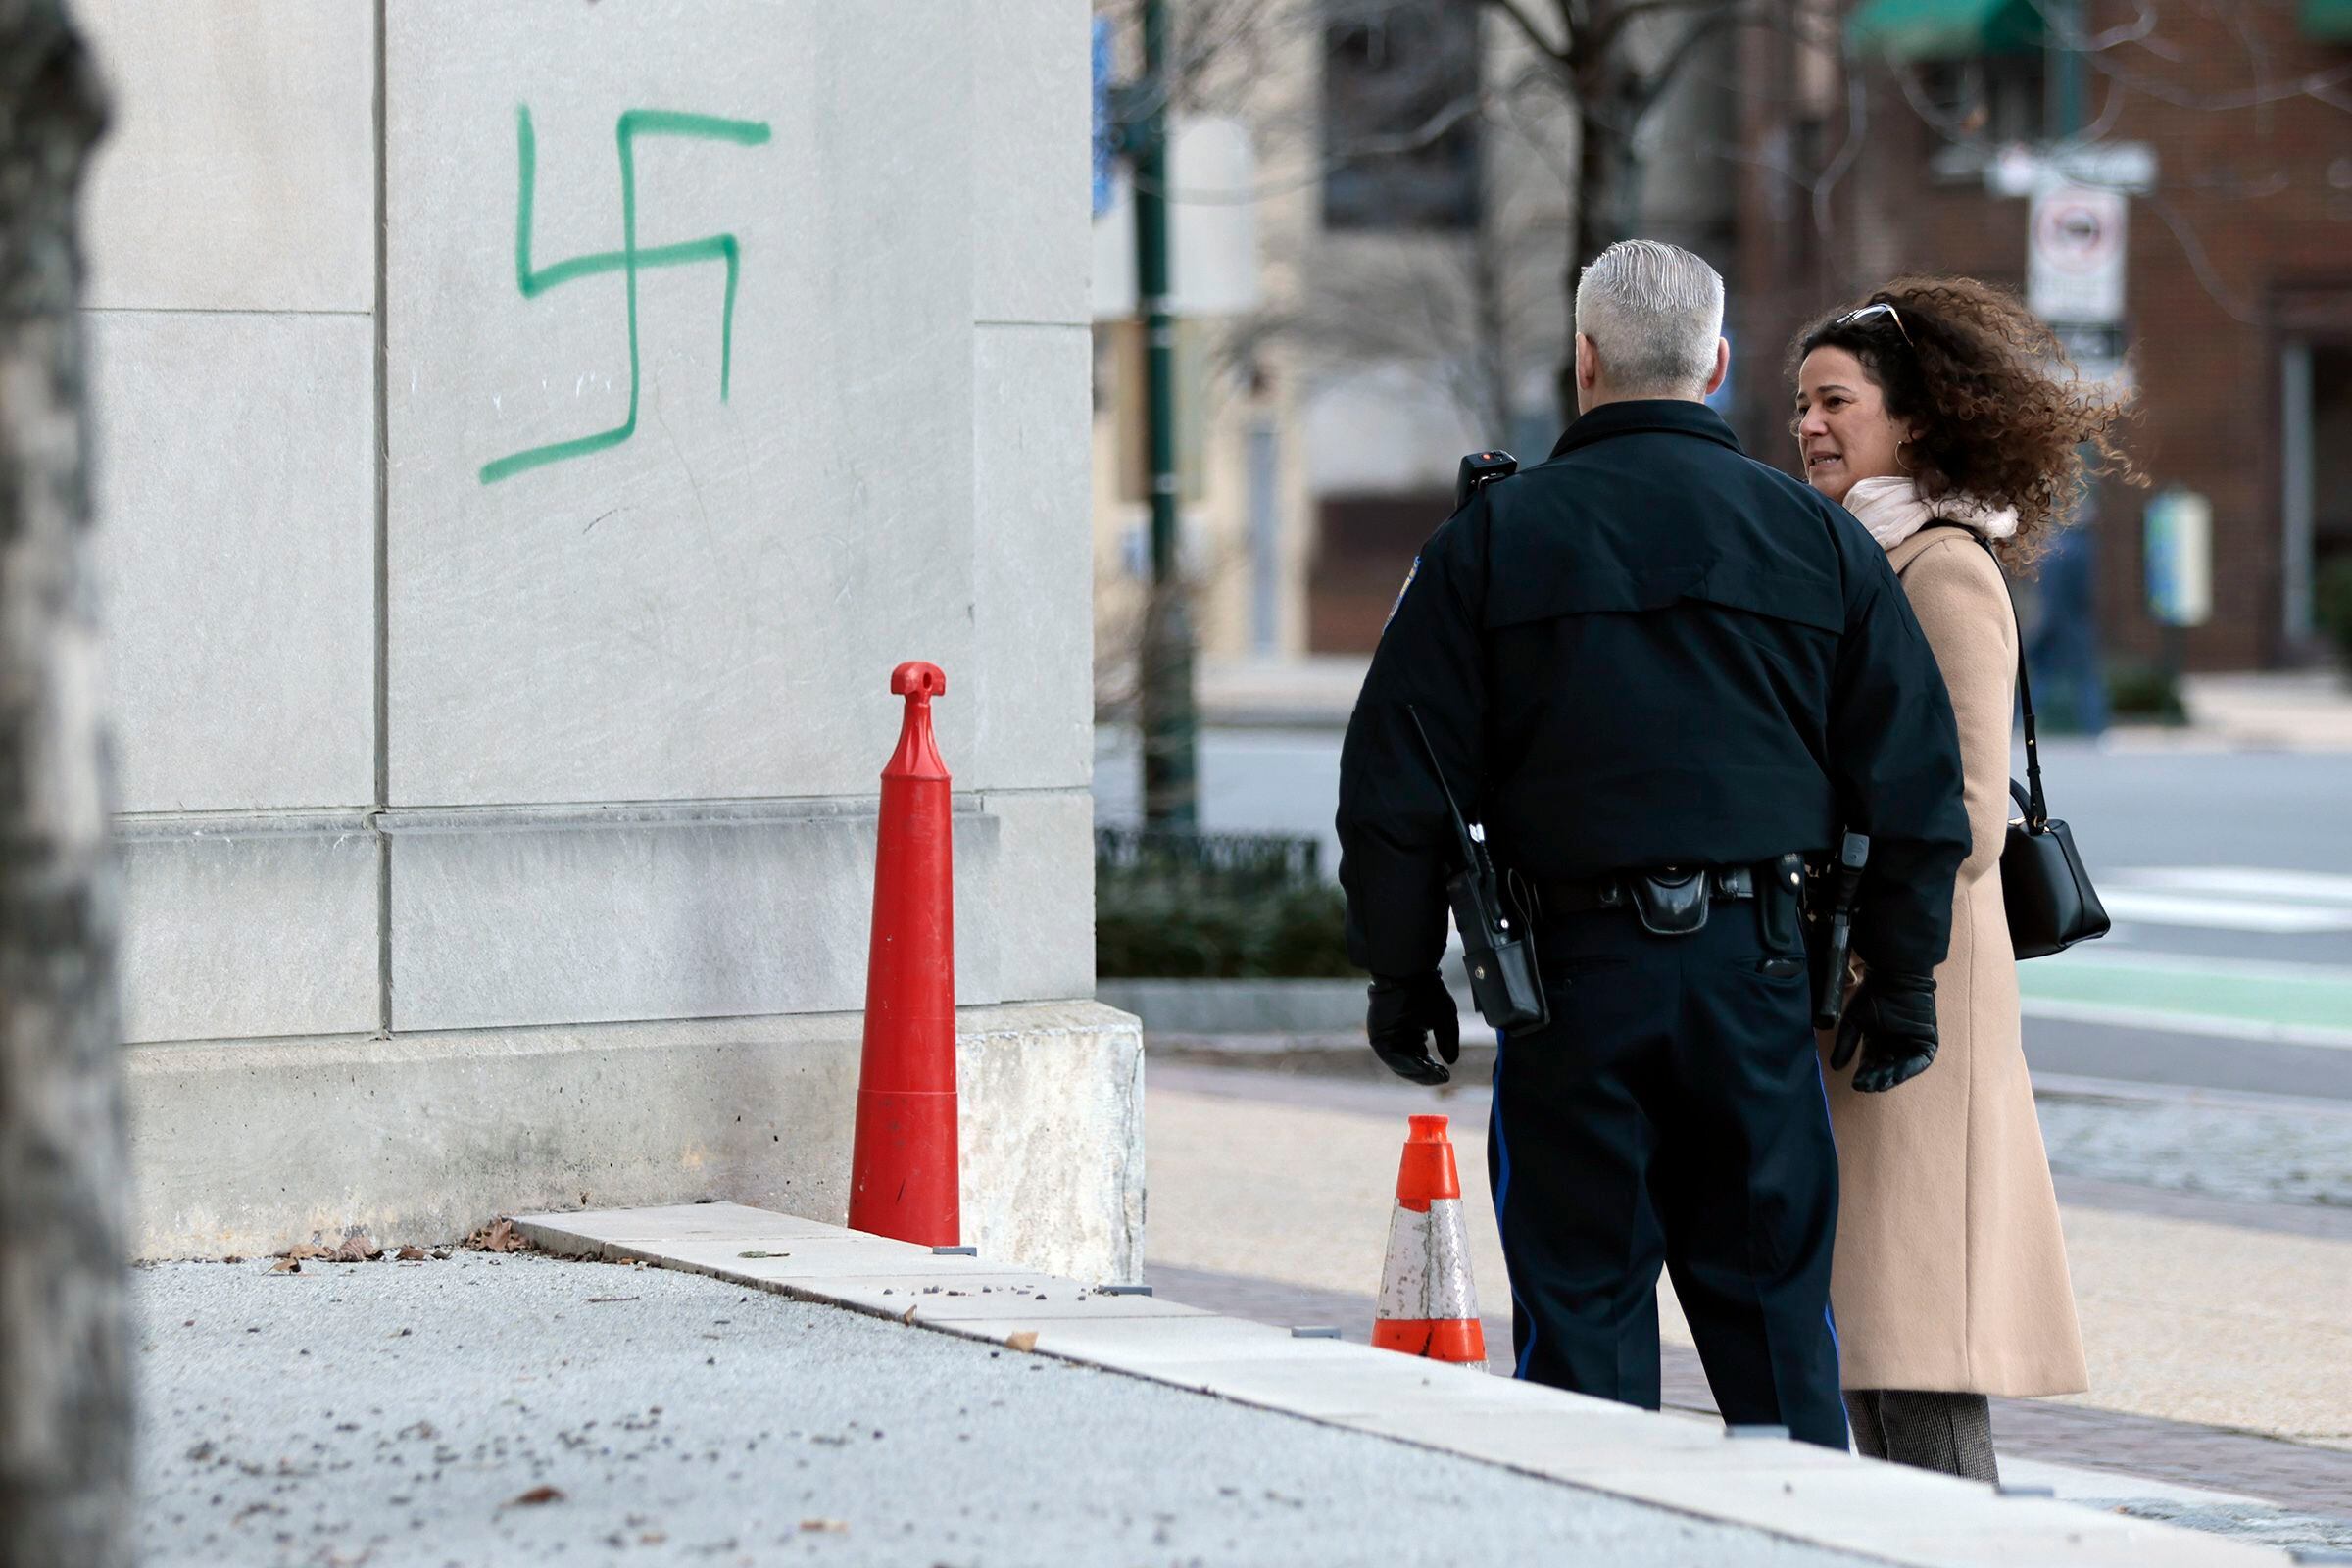 a swastika was painted near the holocaust memorial on the benjamin franklin parkway